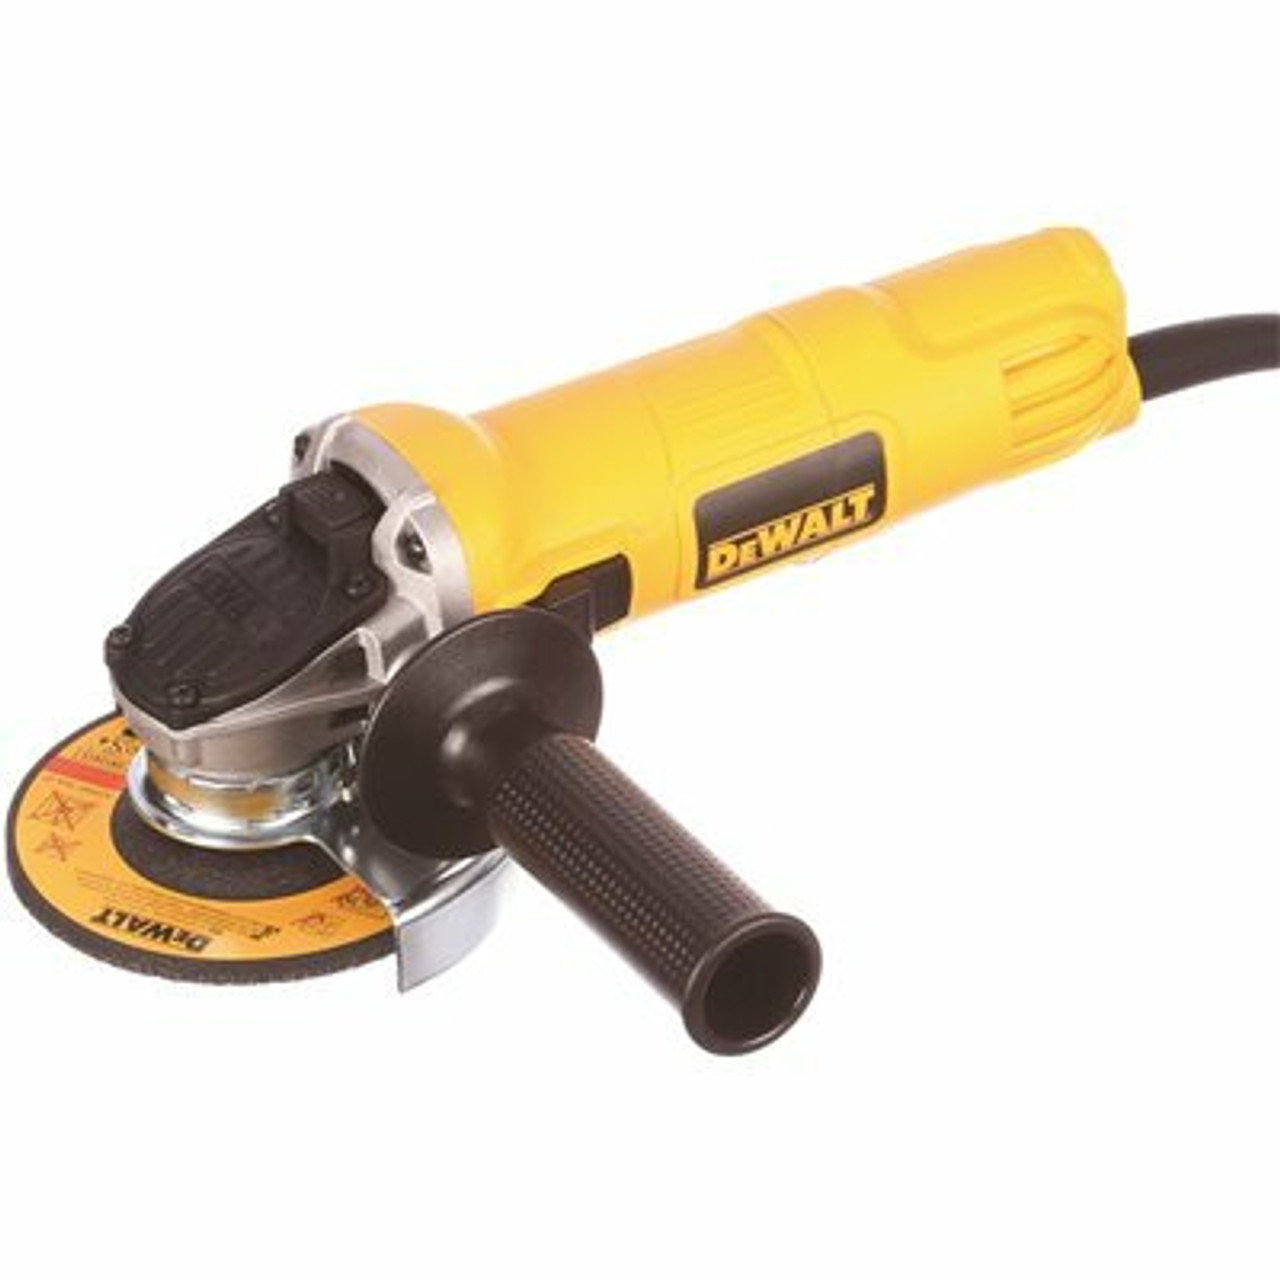 Dewalt 7 Amp 4-1/2 In. Small Angle Grinder With 1-Touch Guard